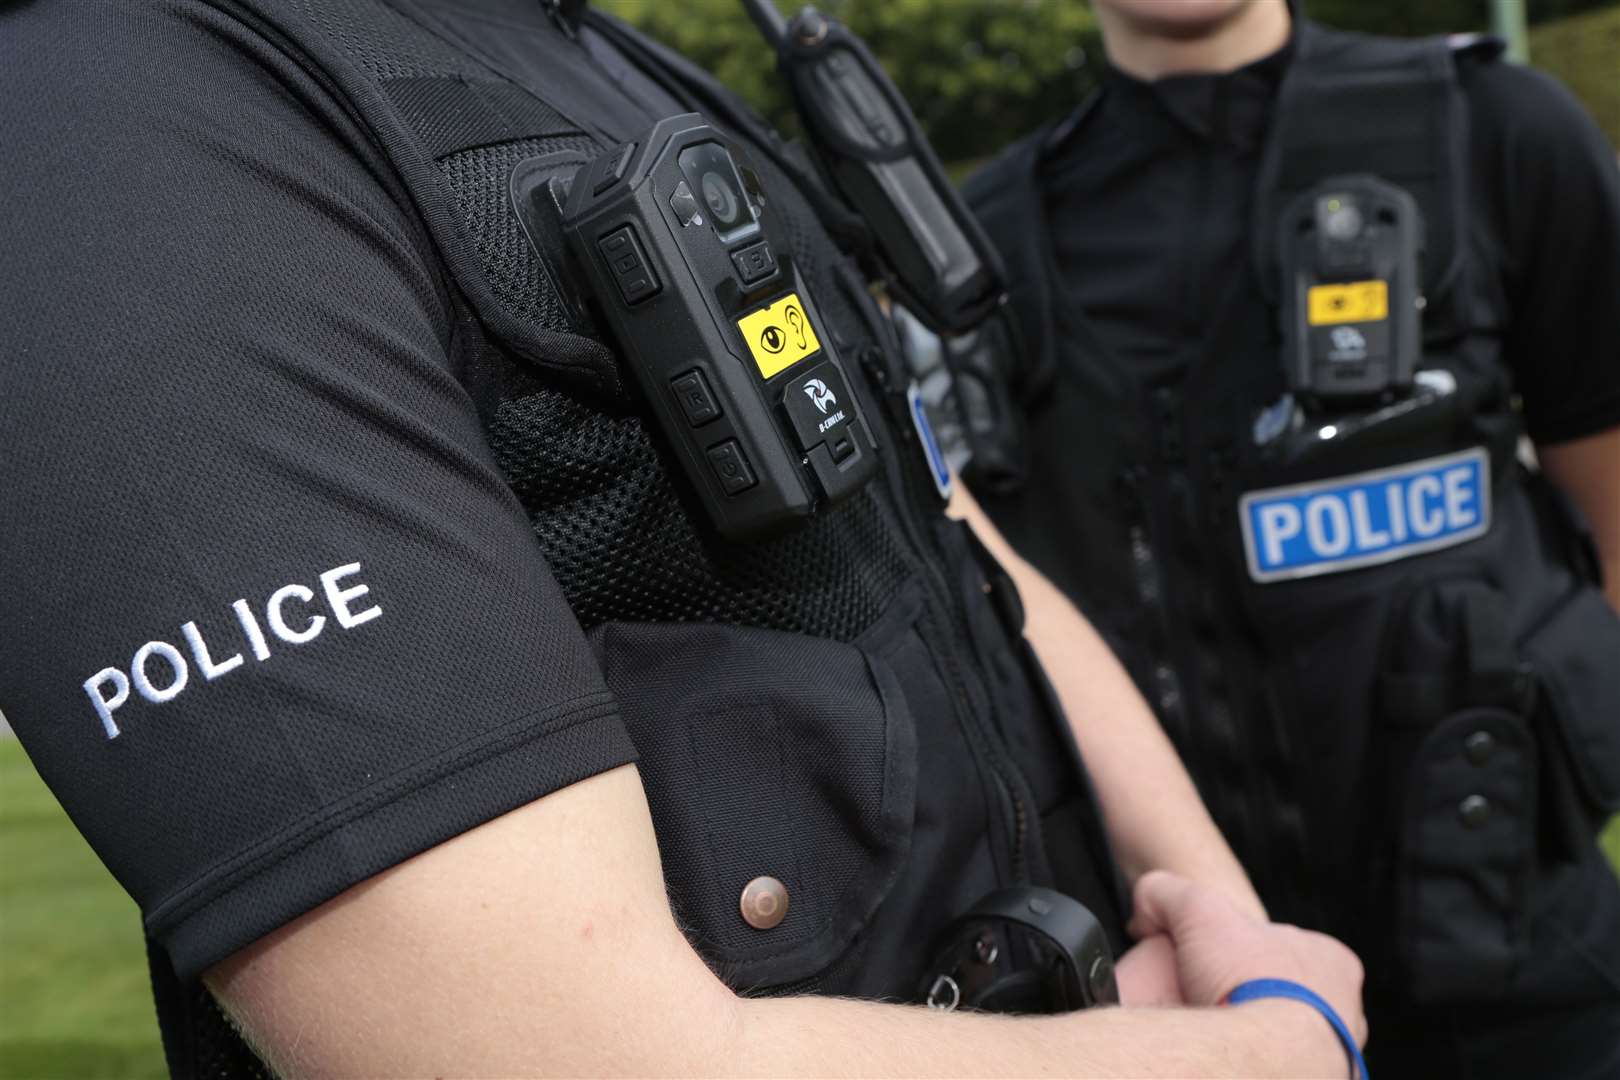 More Kent Police officers have quit in the first 10 months of 2022 compared to the whole of 2021